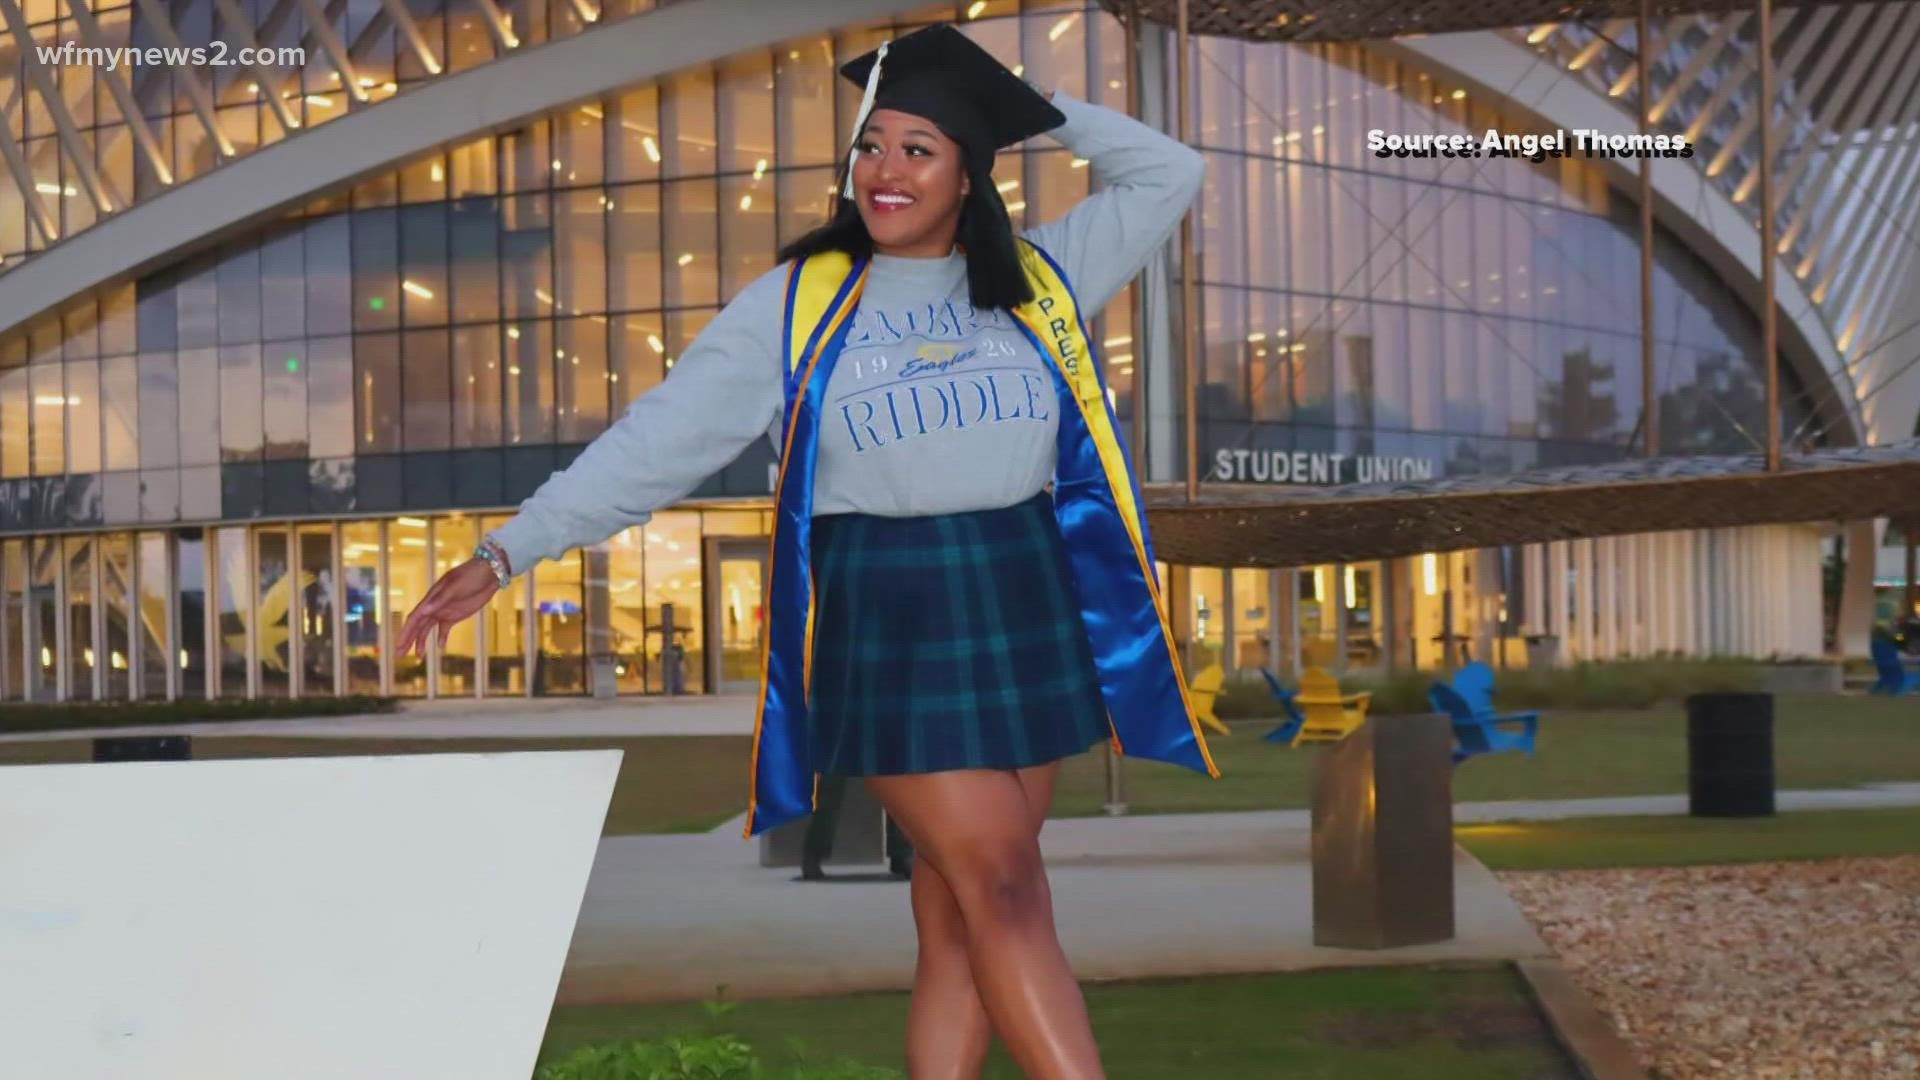 Angel Thomas was left as a baby under a staircase in Greensboro in 1999. Now, she's about to graduate from Embry-Riddle Aeronautical University.